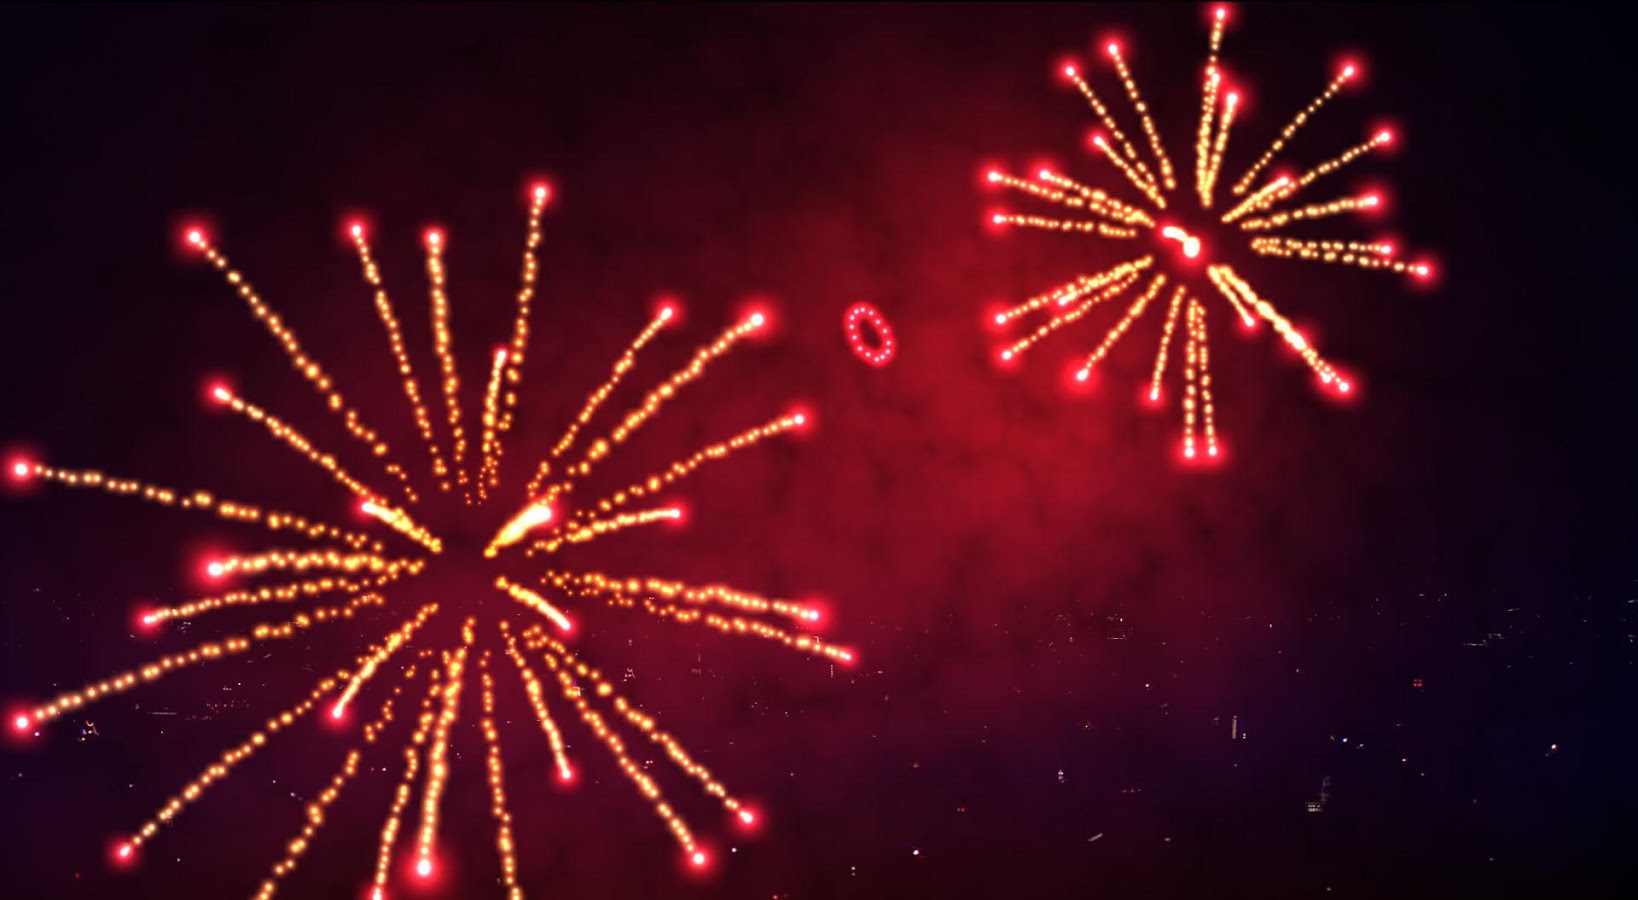 3D Fireworks Wallpaper Free Android Apps On Google Play